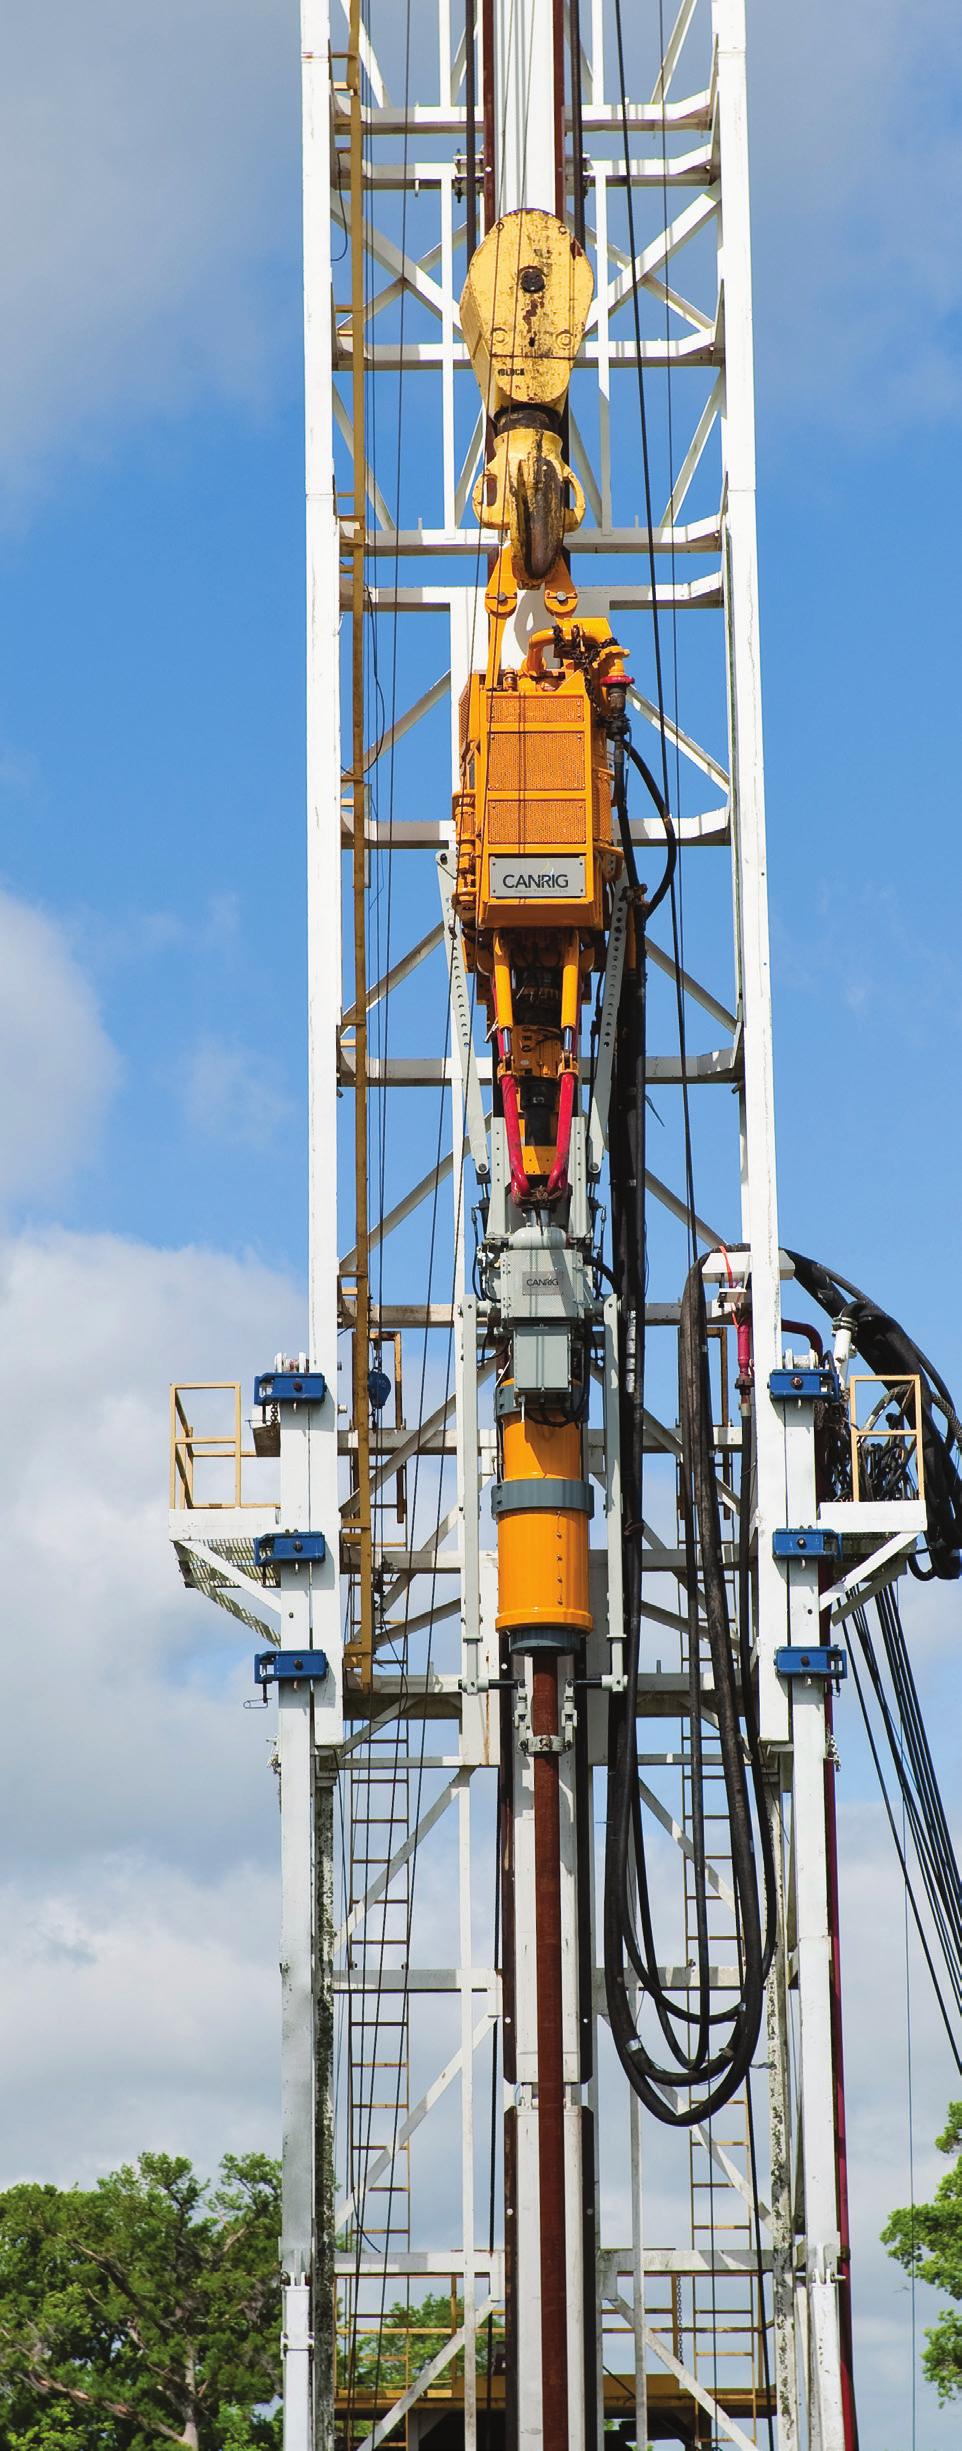 Over the last 35 years, Canrig has become one of the world s leading suppliers of top drive drilling systems for the oil and gas industry with over 14 units delivered in the market.